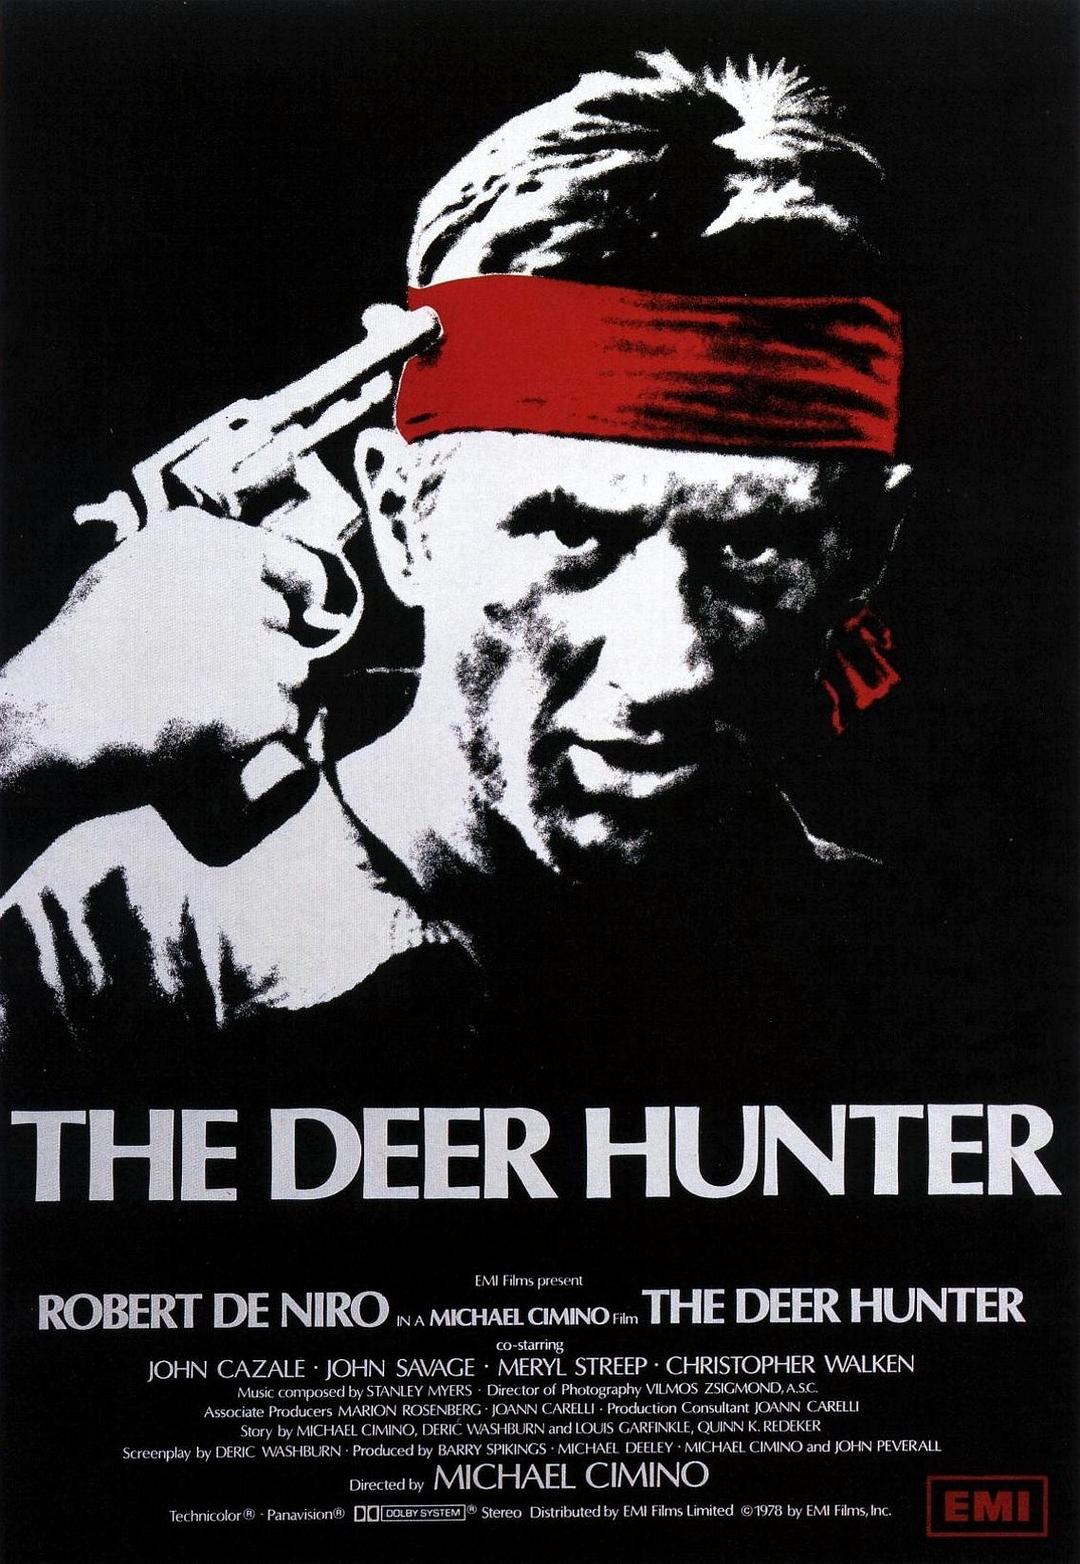 ¹/¹ The.Deer.Hunter.1978.REMASTERED.1080p.BluRay.X264-AMIABLE 18.59GB-1.png